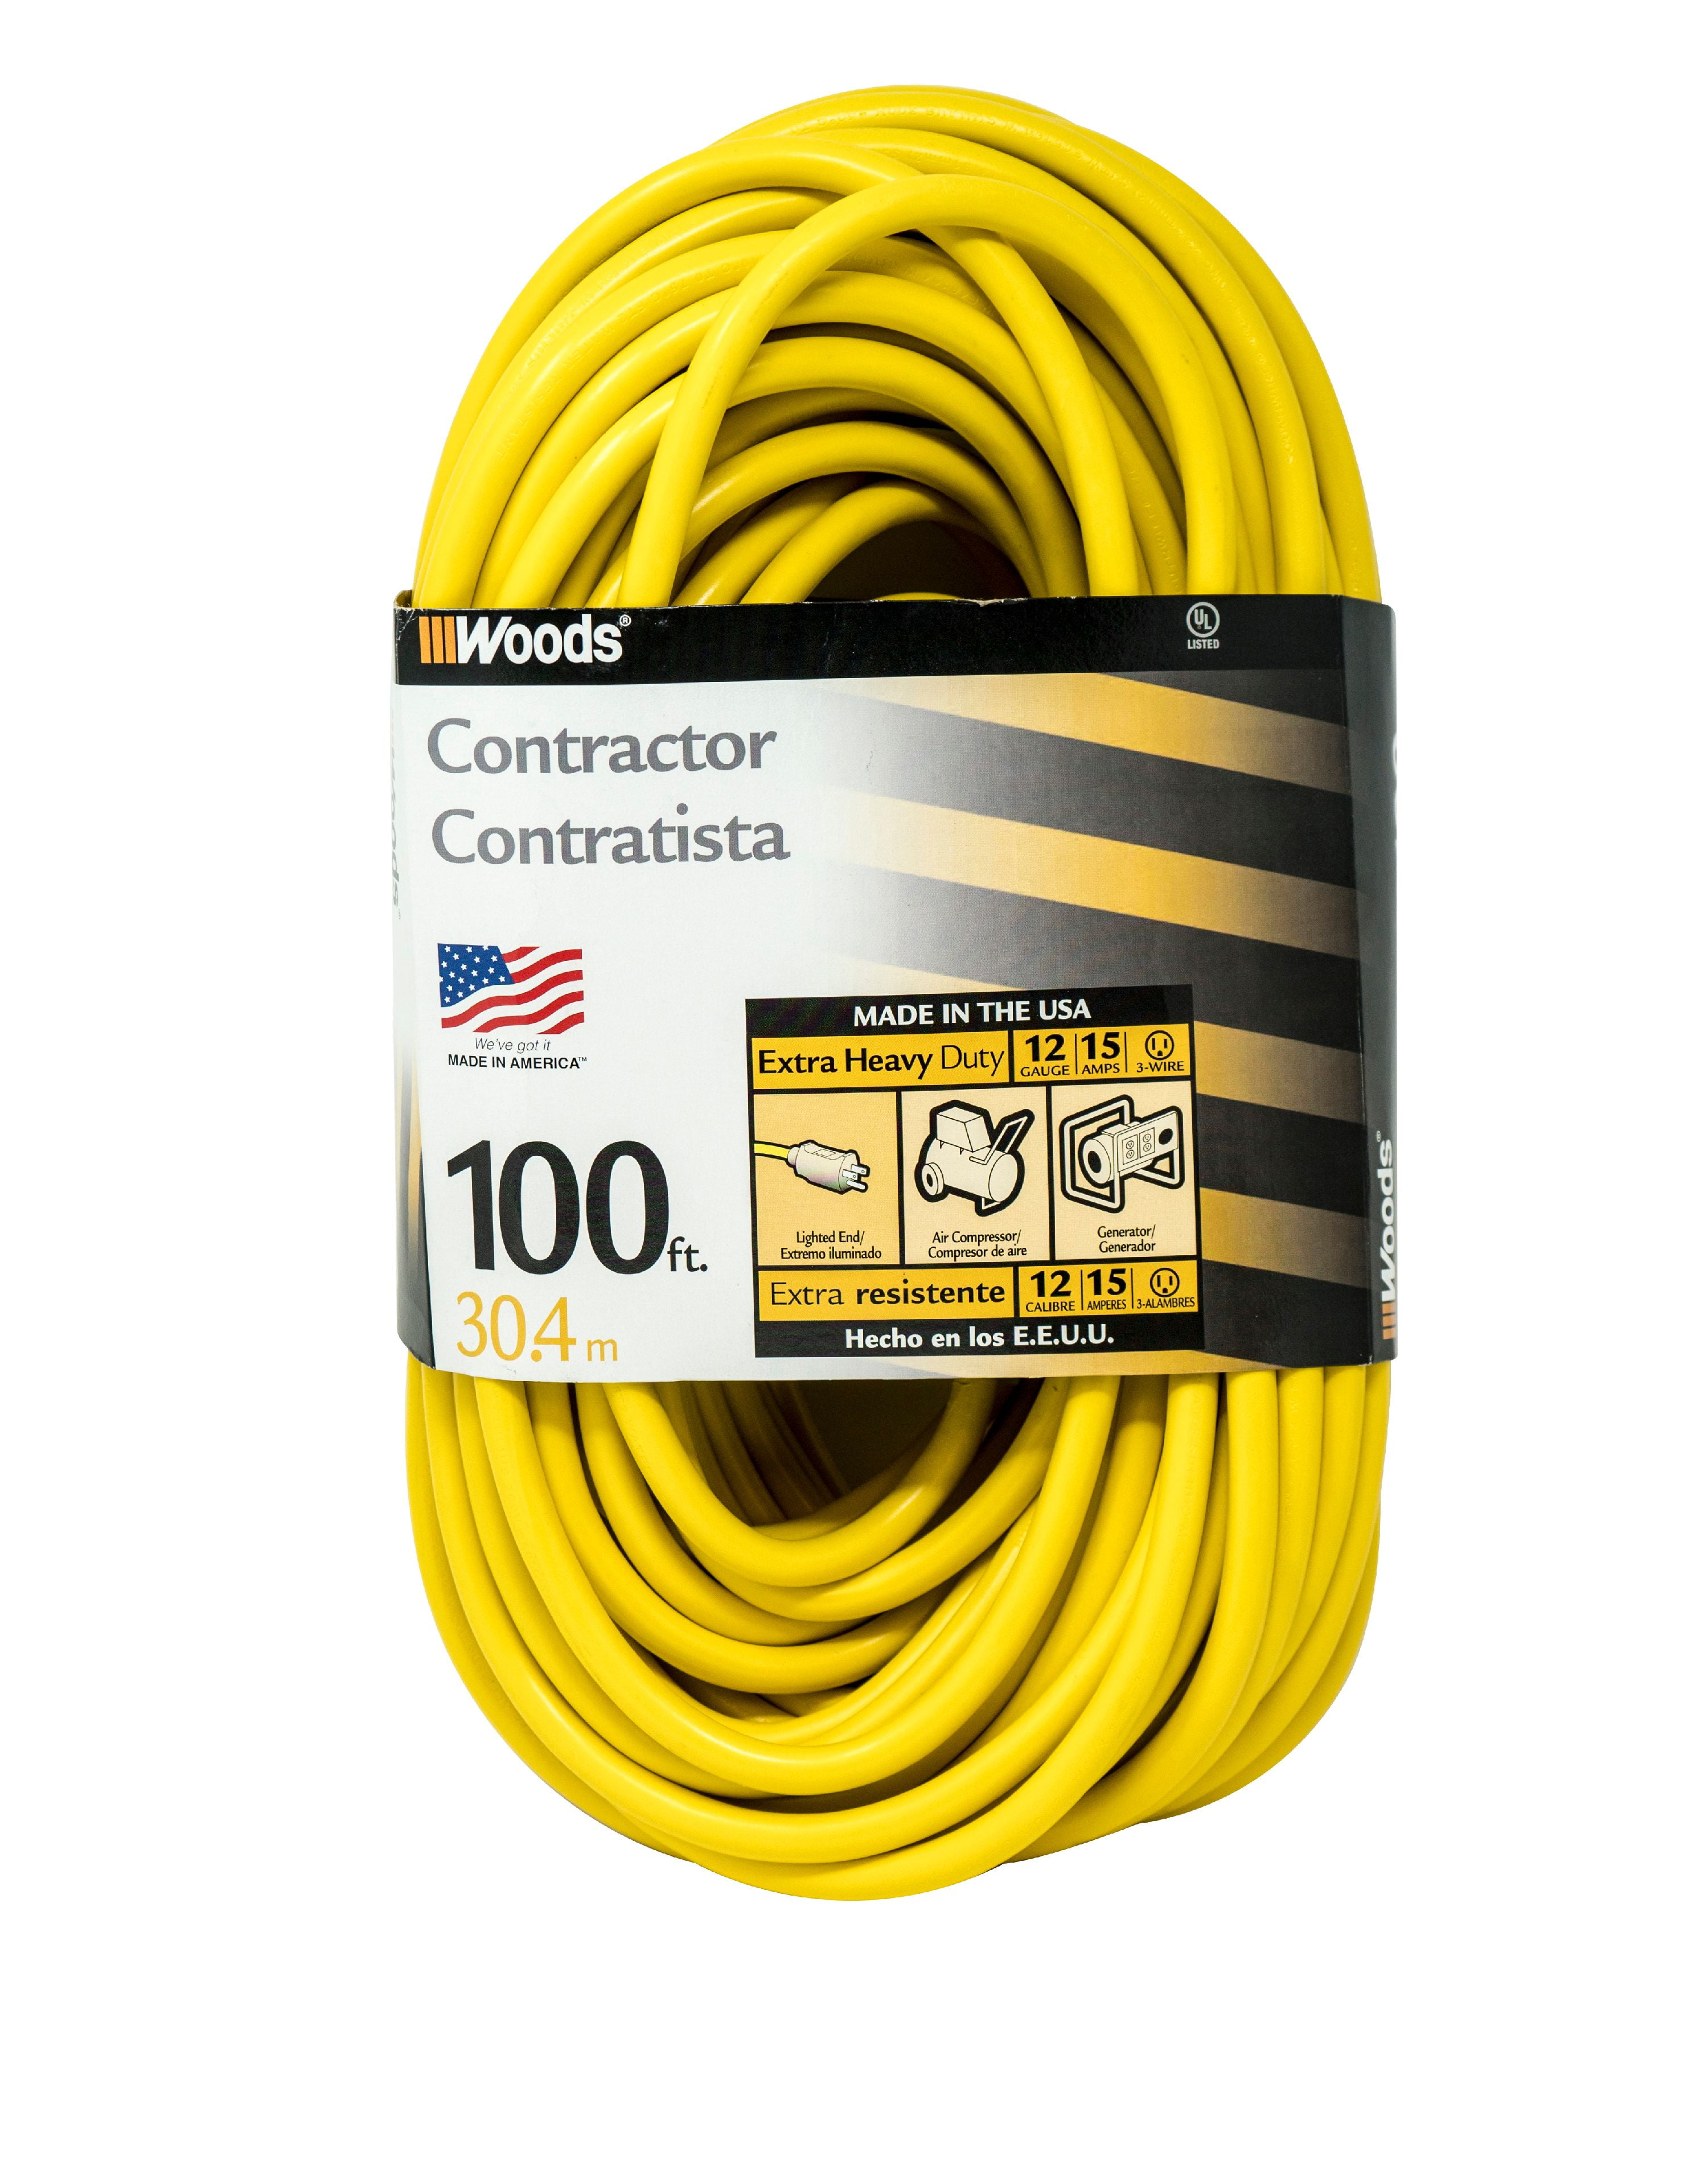 MADE IN USA 100' 12 Gauge Black Heavy Duty Cord with Lighted Triple Outlet 